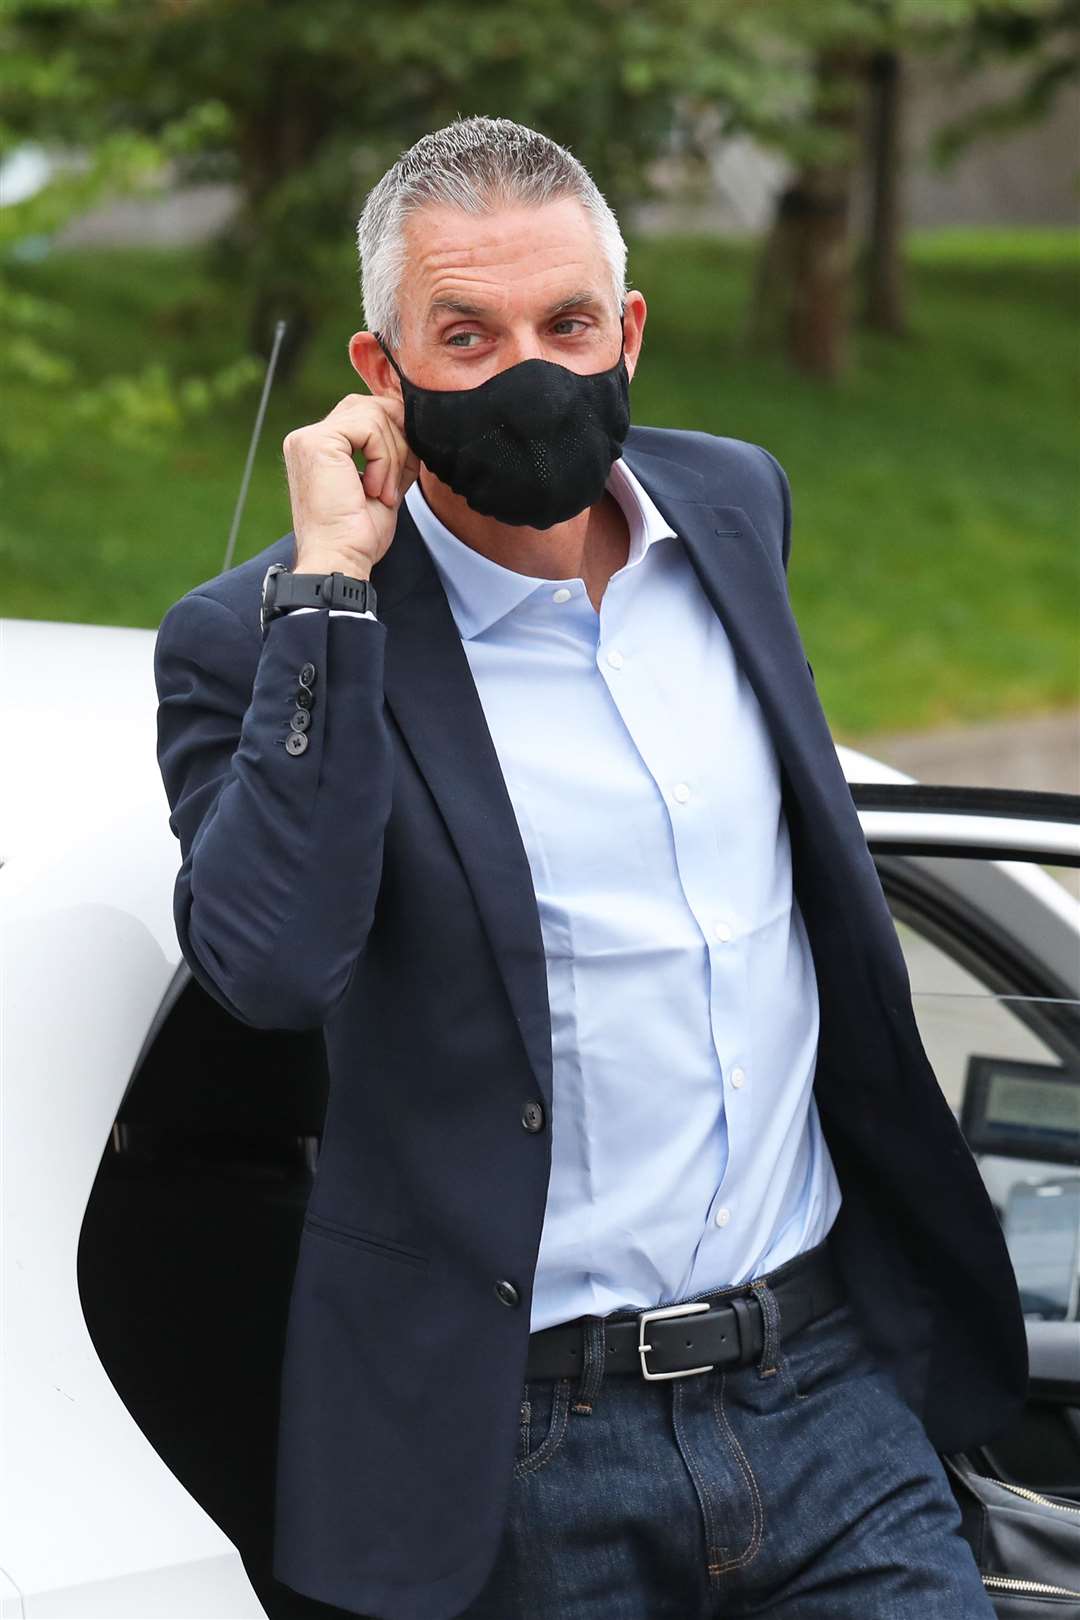 He took off his mask as he got out of the car (Andrew Milligan/PA)